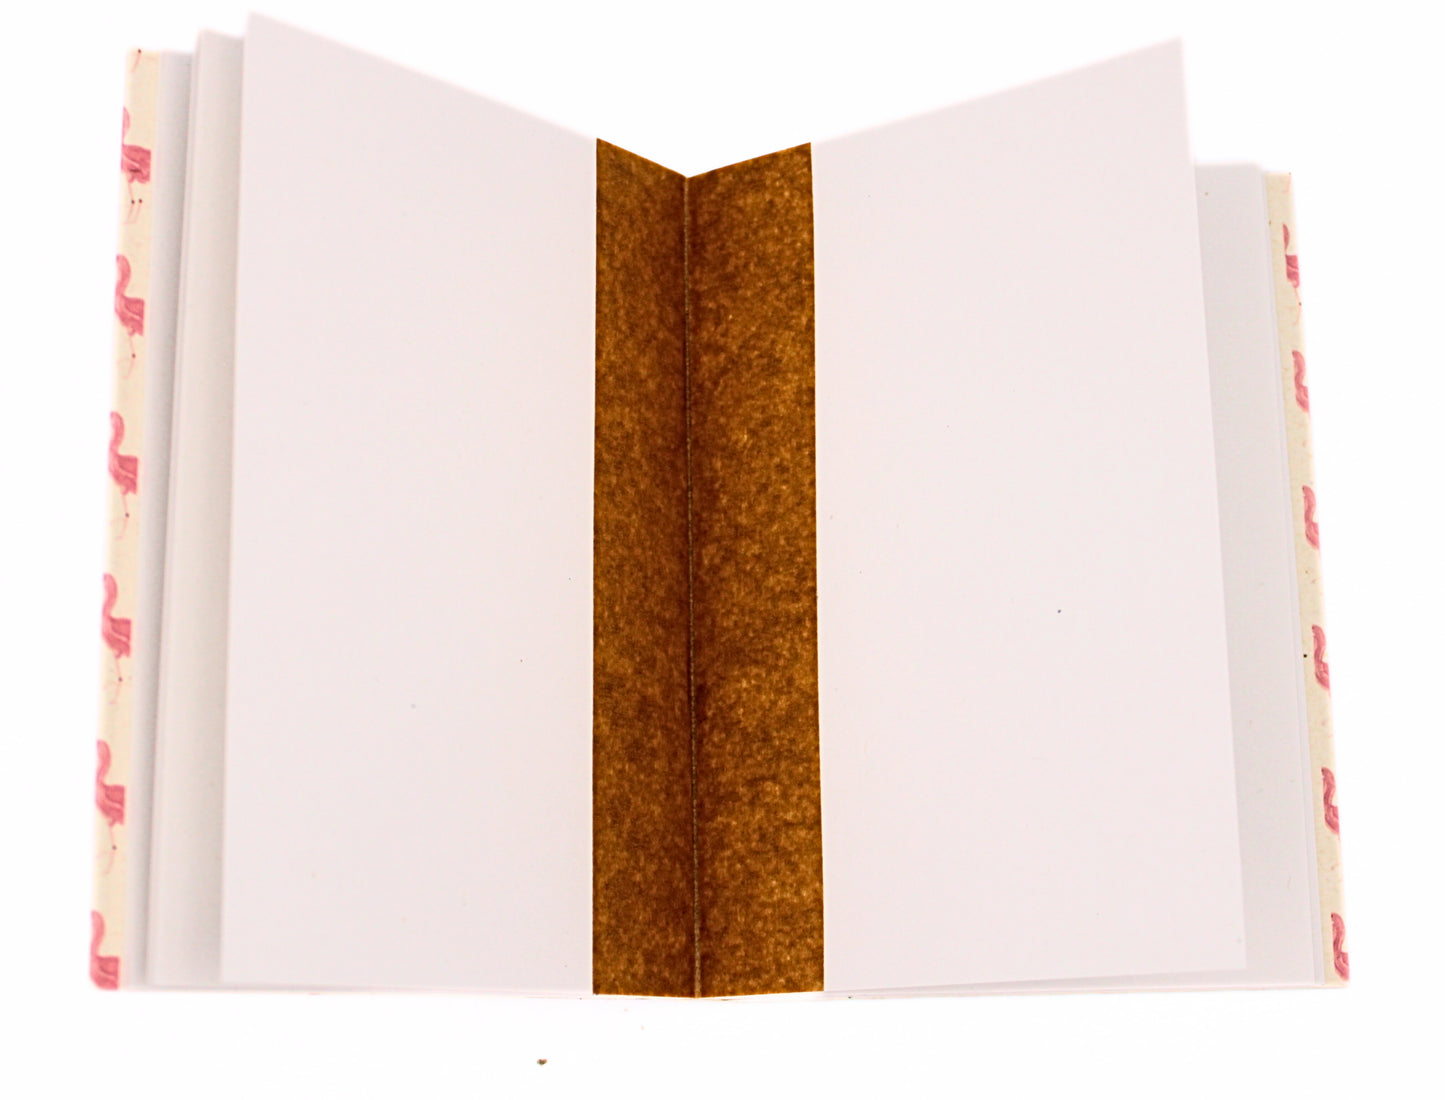 Blank pages inside Badly Made Books A6 Blank Notebooks